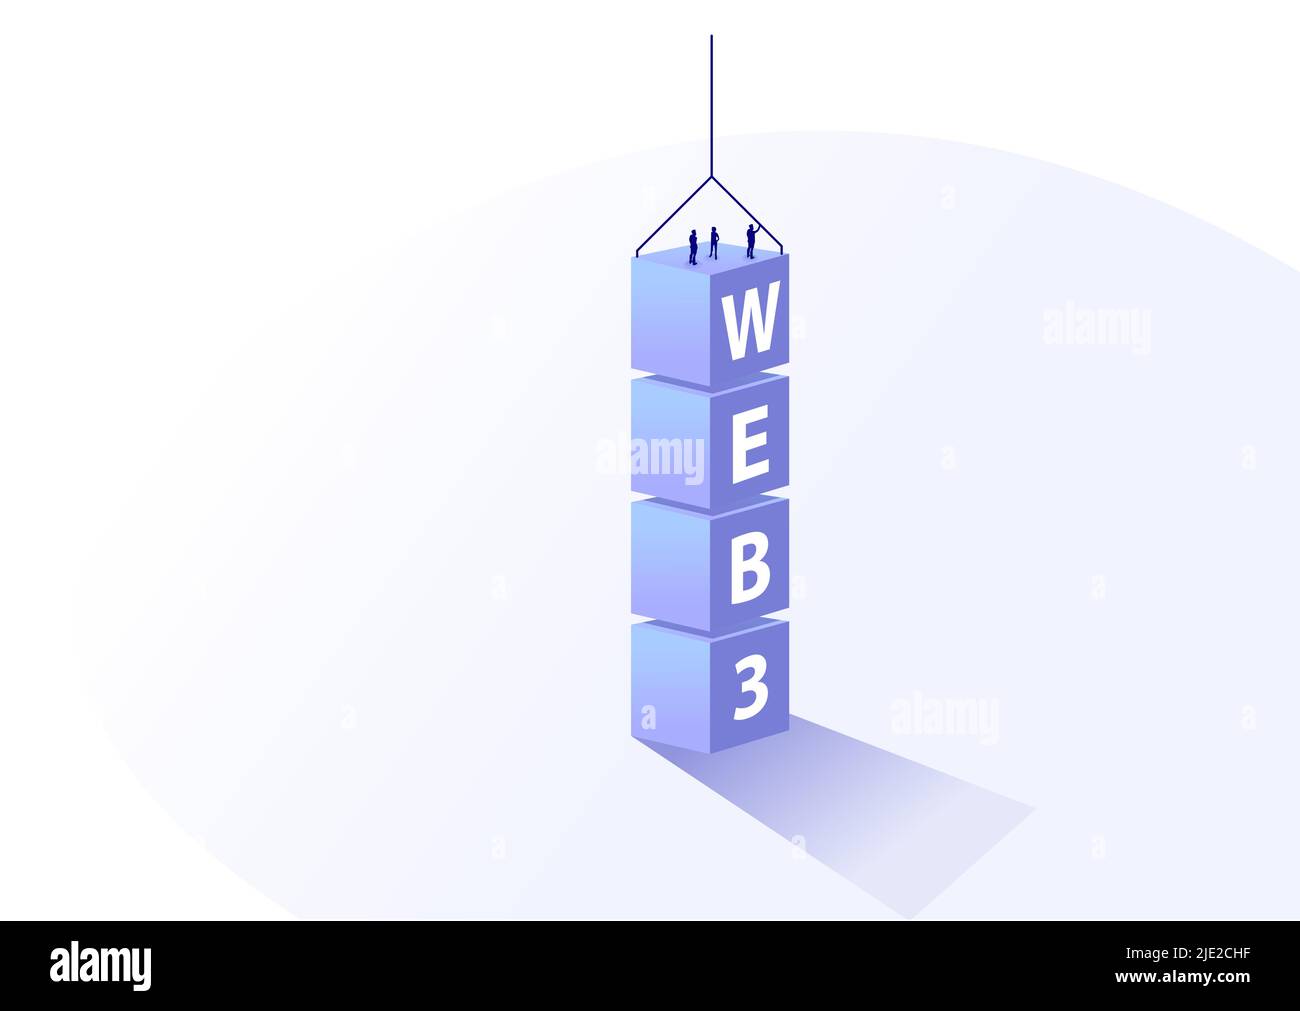 Web 3.0 software development concept. Vector illustration of text blocks that are being constructed by software developers. Minimalistic bird's eye vi Stock Vector